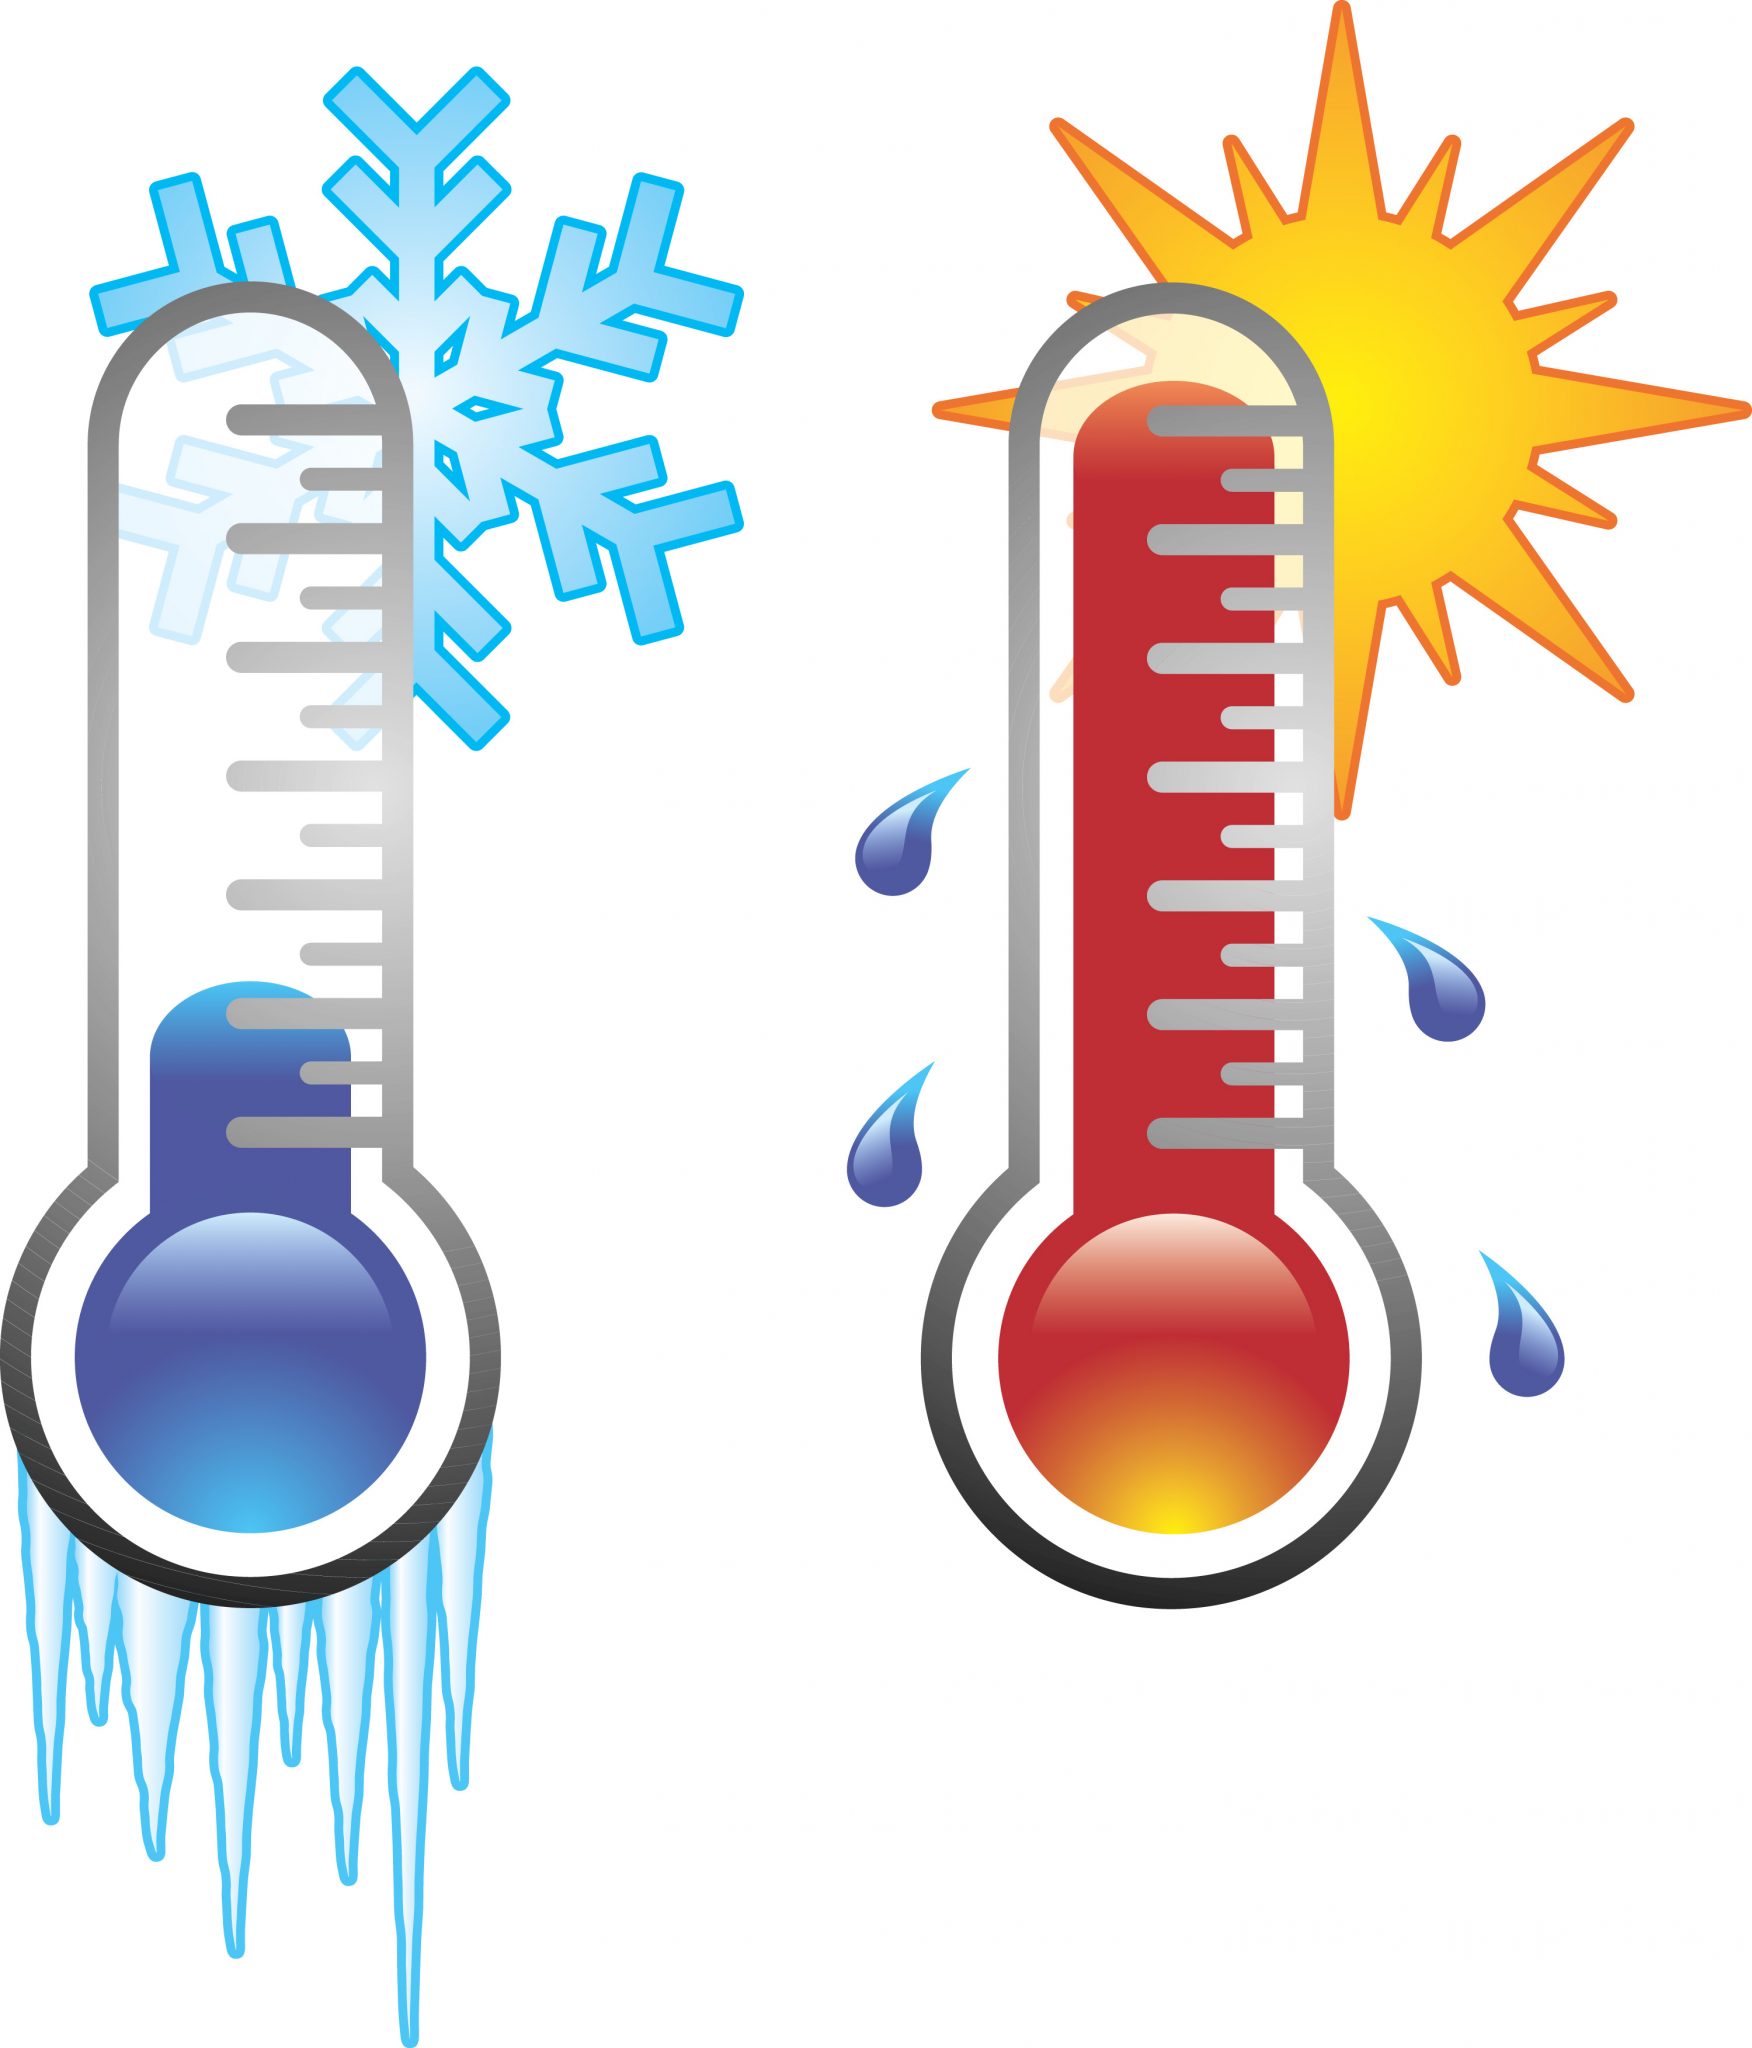 Thermometer reading cold temperature with snowflake behind it and thermometer reading hot temperature with a sun behind it